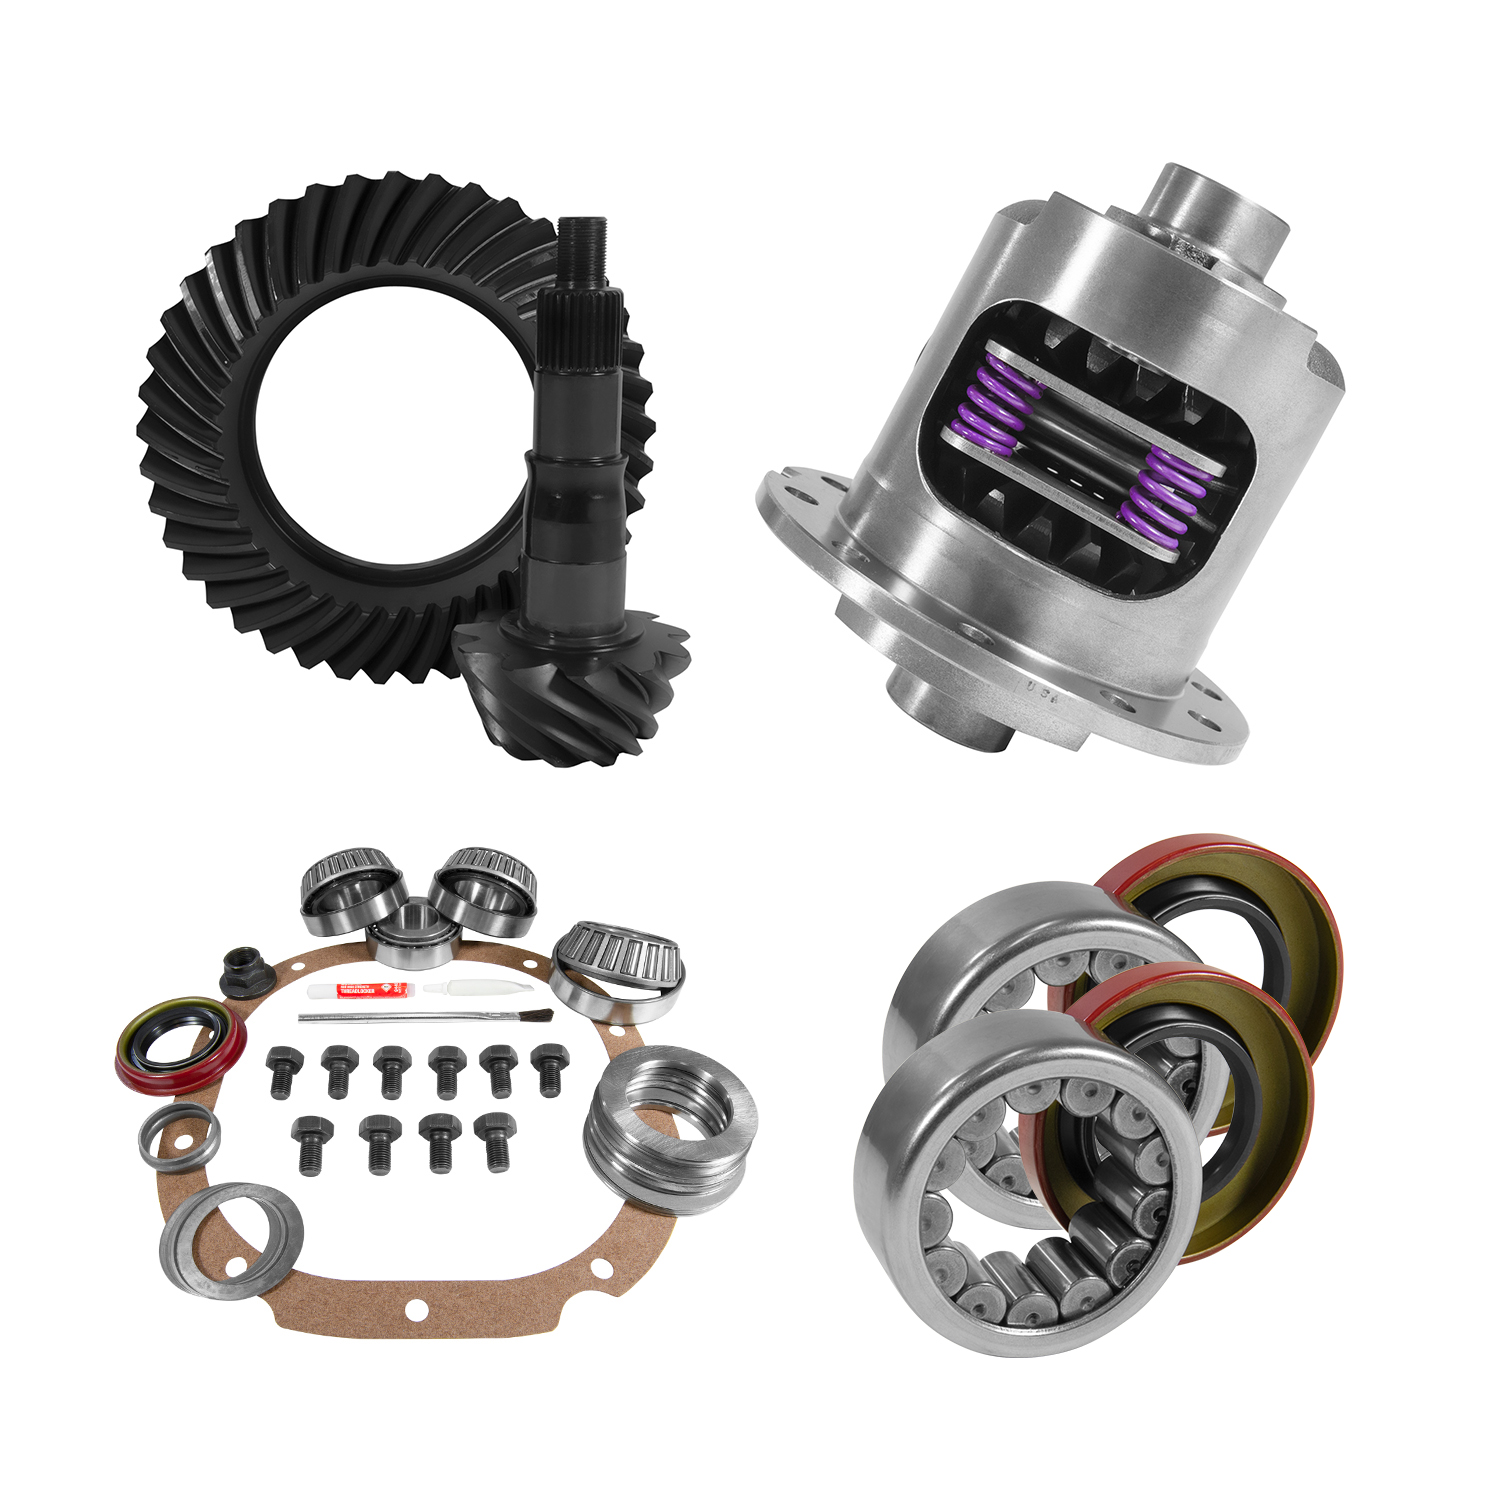 USA Standard 10763 8.8 in. Ford 4.11 Rear Ring & Pinion Install Kit, 31Spl Posi, 2.99 in. Axle Bearings